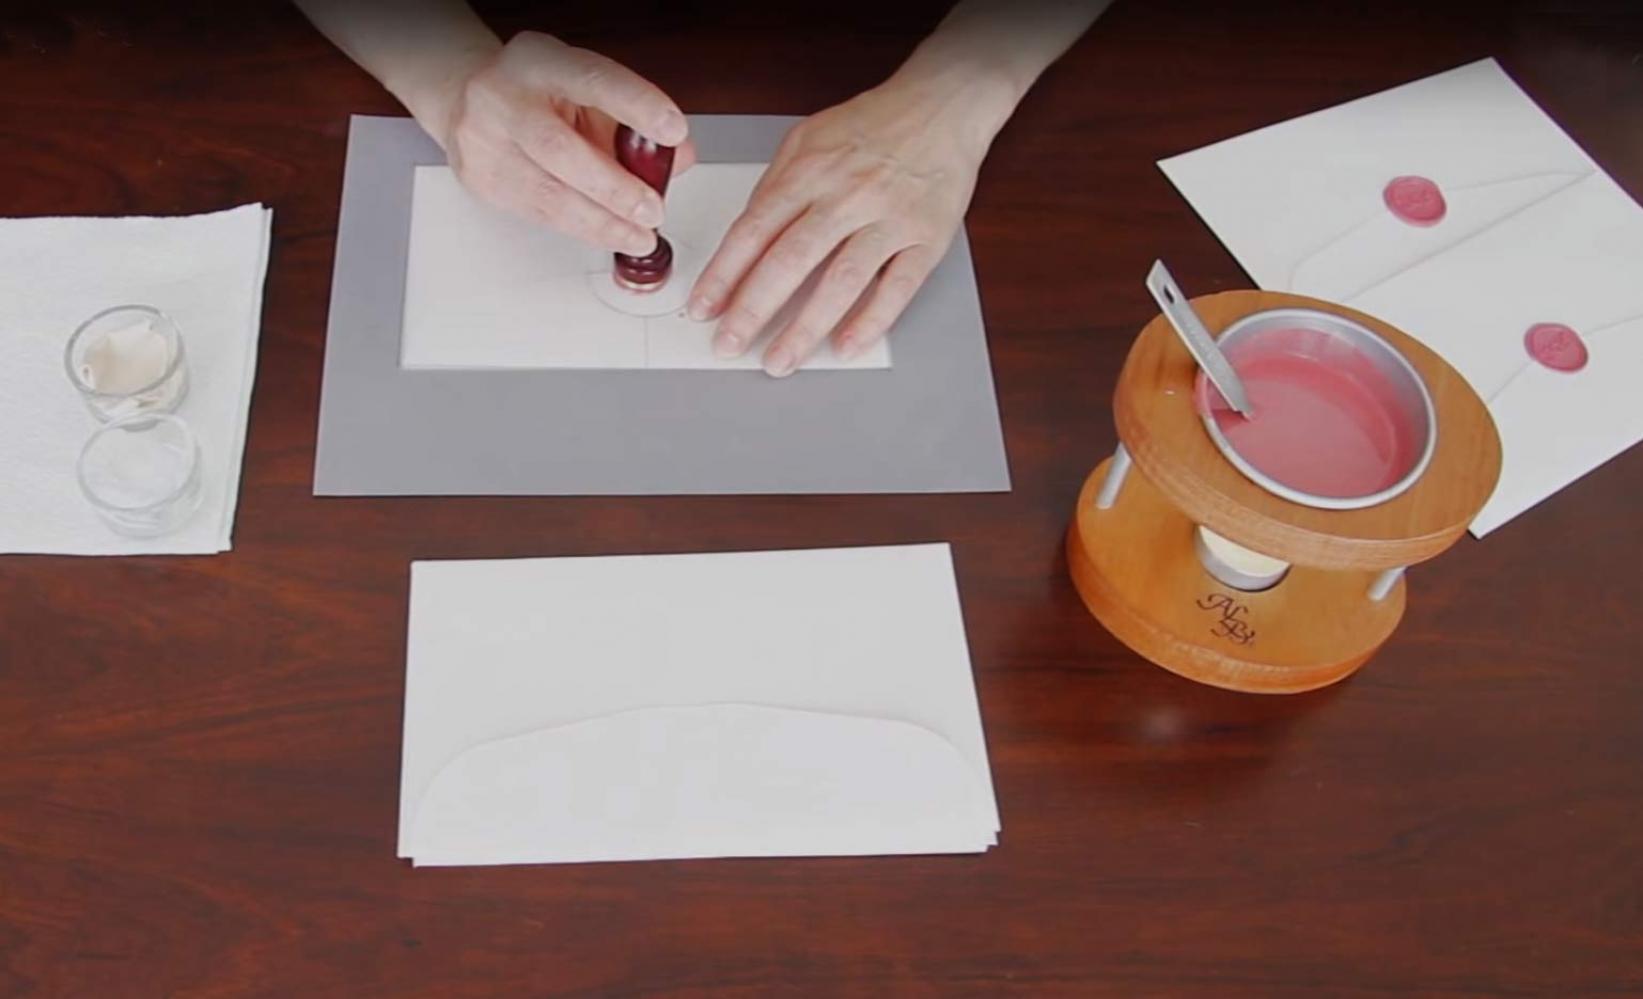 How to do wax seal several envelopes using a personal wax sealer